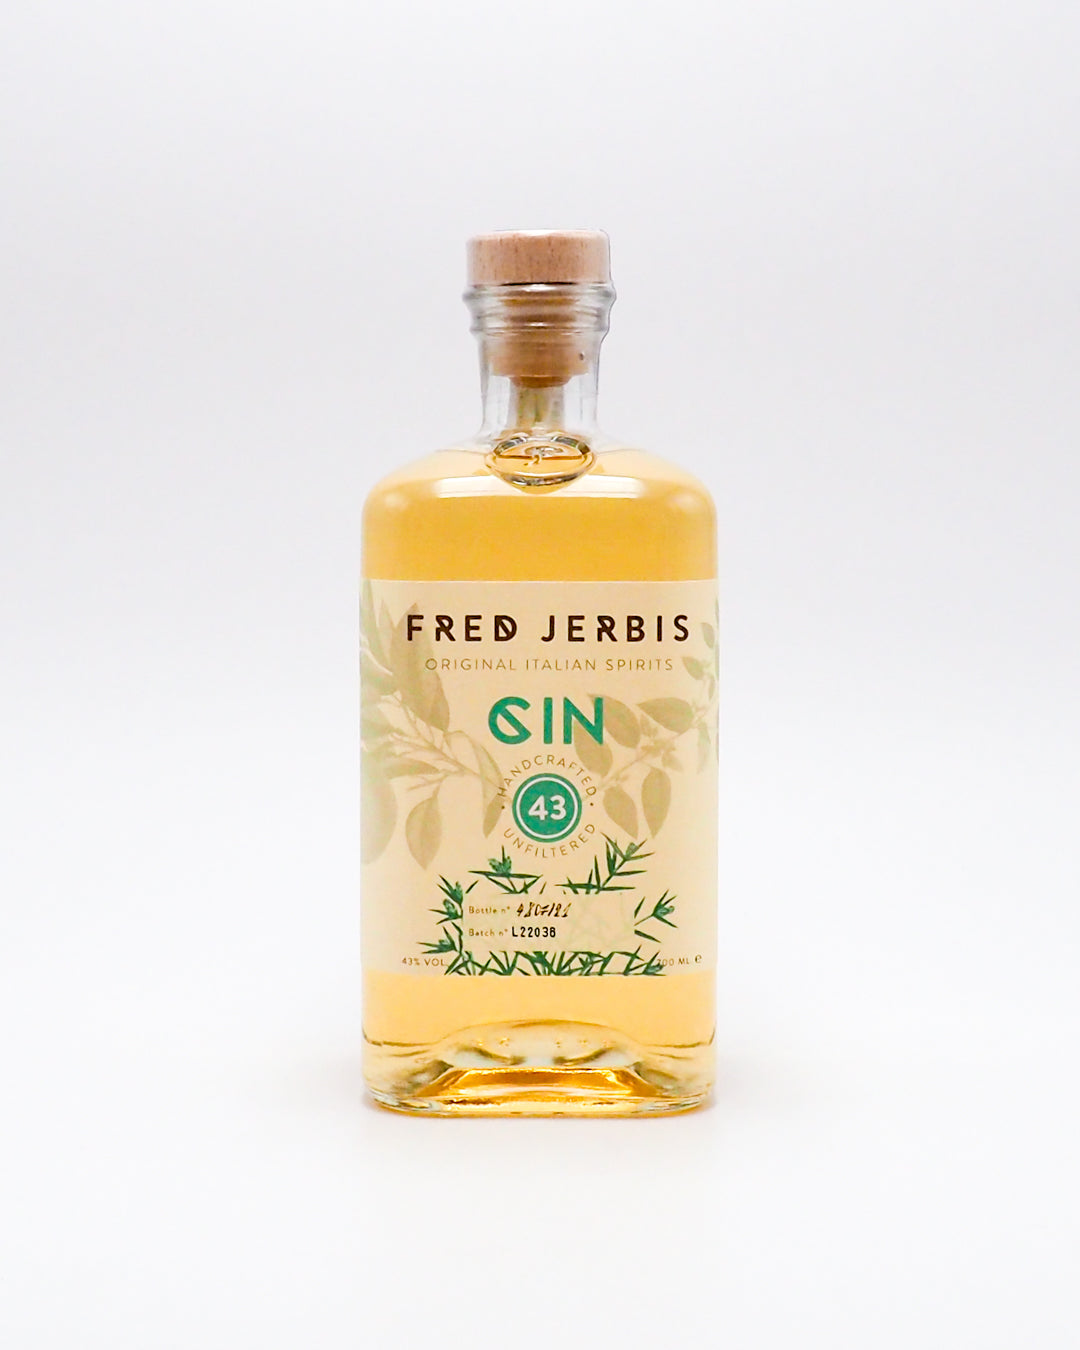 gin-43-fred-jerbis-43-70cl